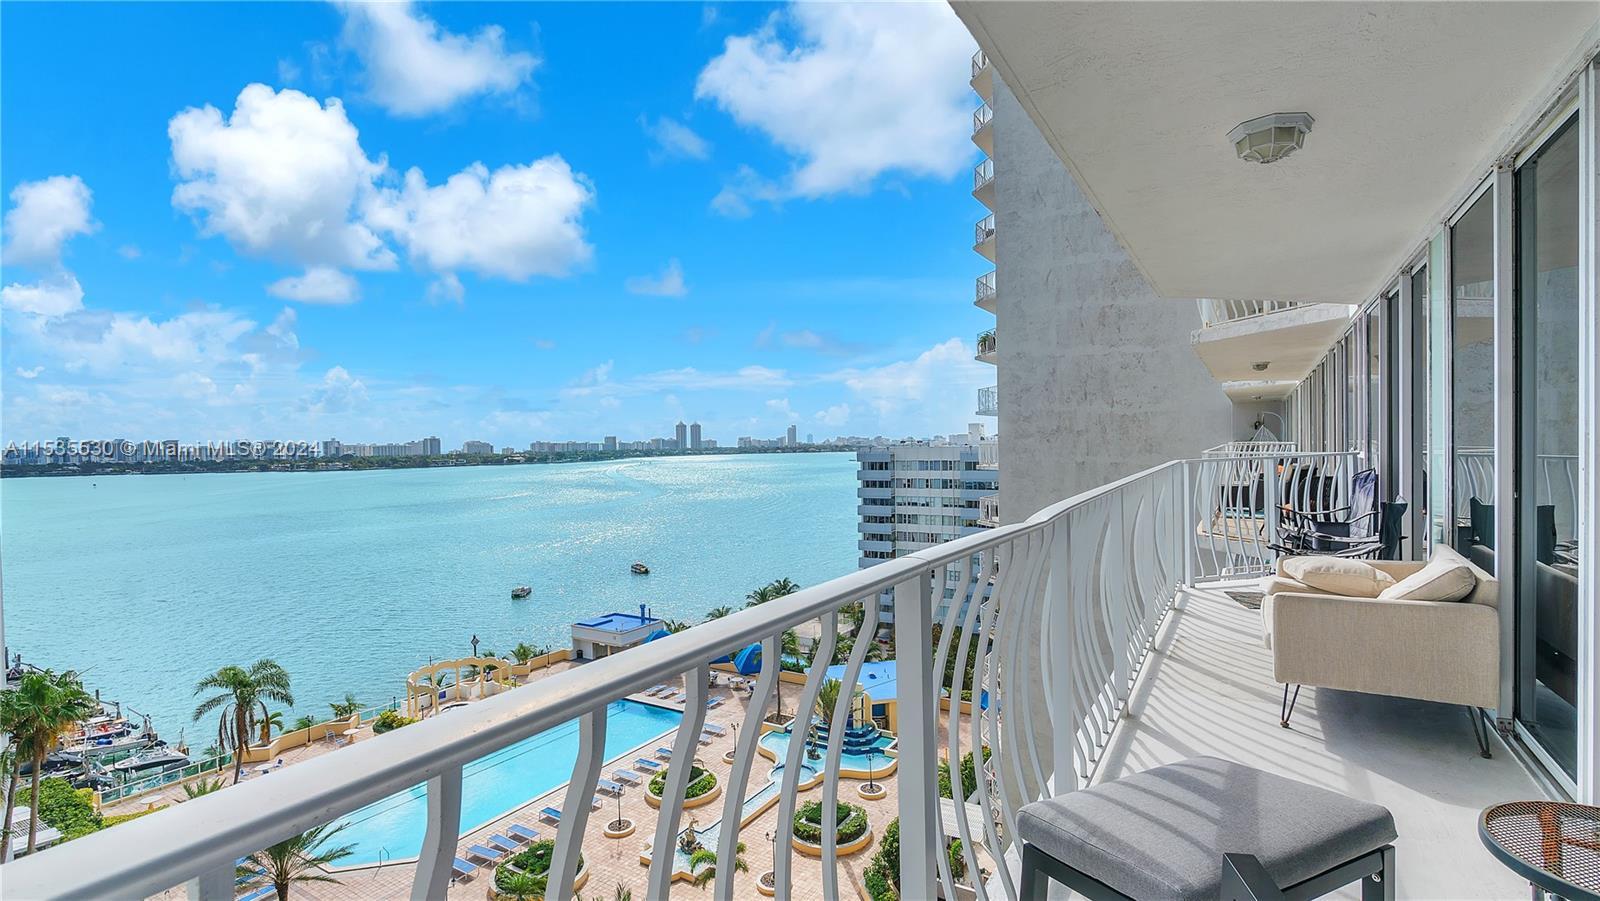 This exquisite condo offers a perfect blend of modern comfort and waterfront luxury living. Situated